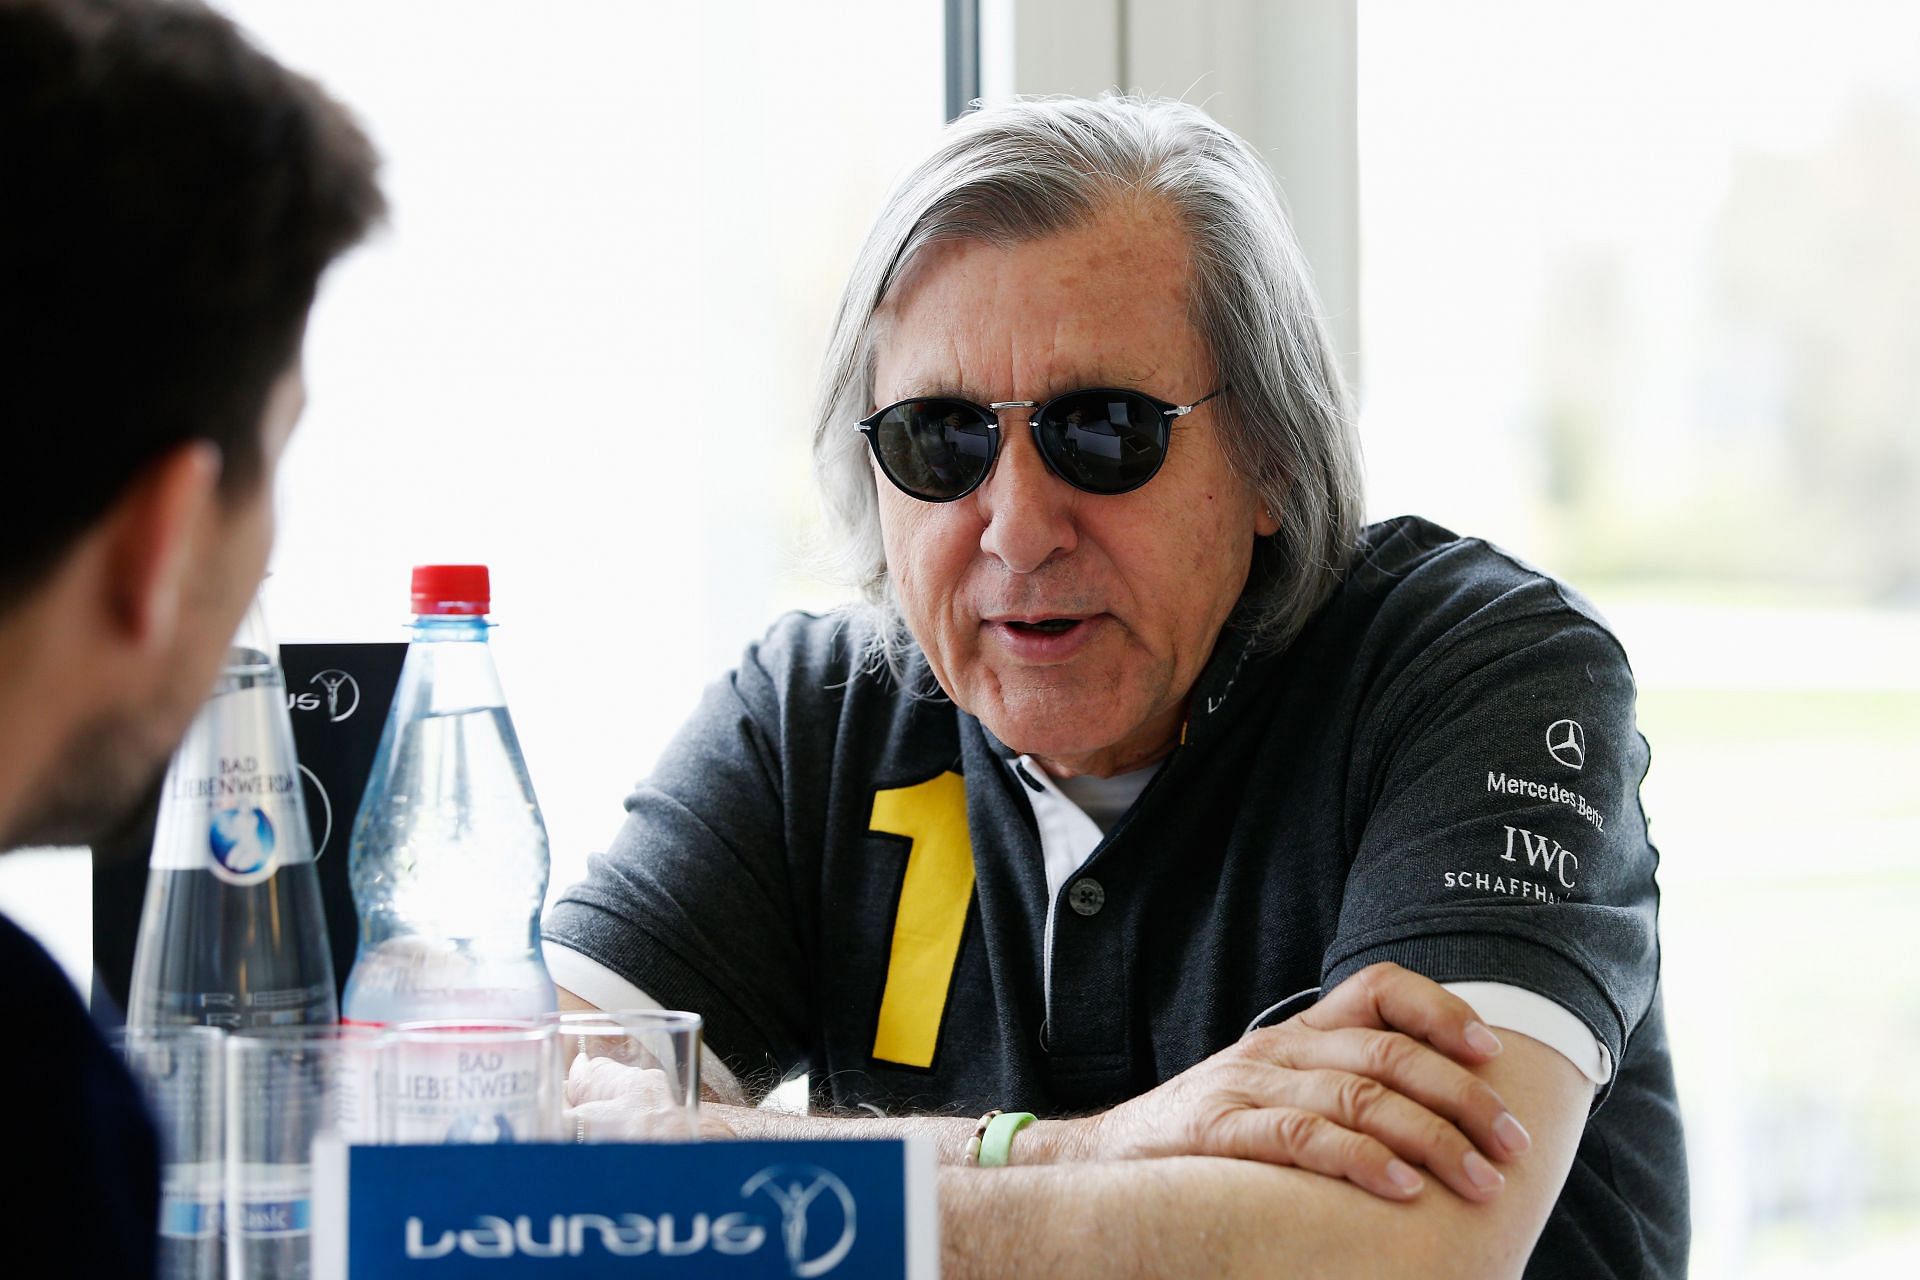 Ilie Nastase was the first player in the Open Era to complete the Monte-Carlo and Barcelona Double